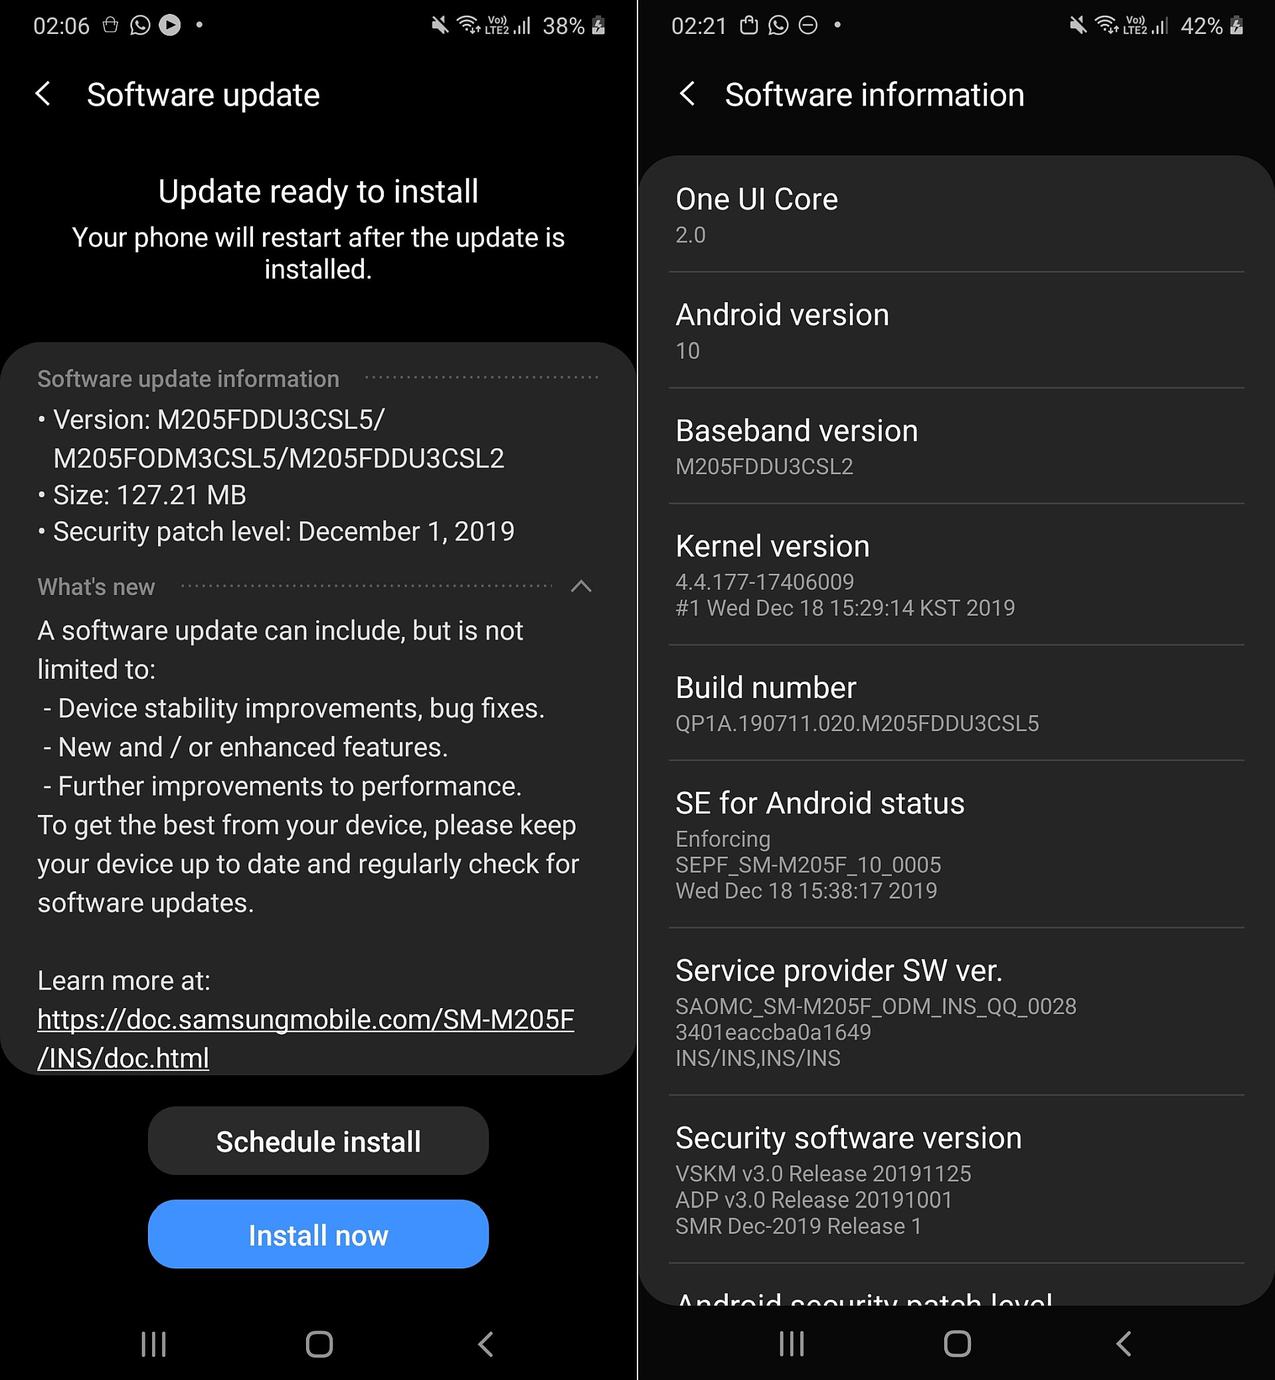 Samsung Galaxy M20 latest Android 10 update